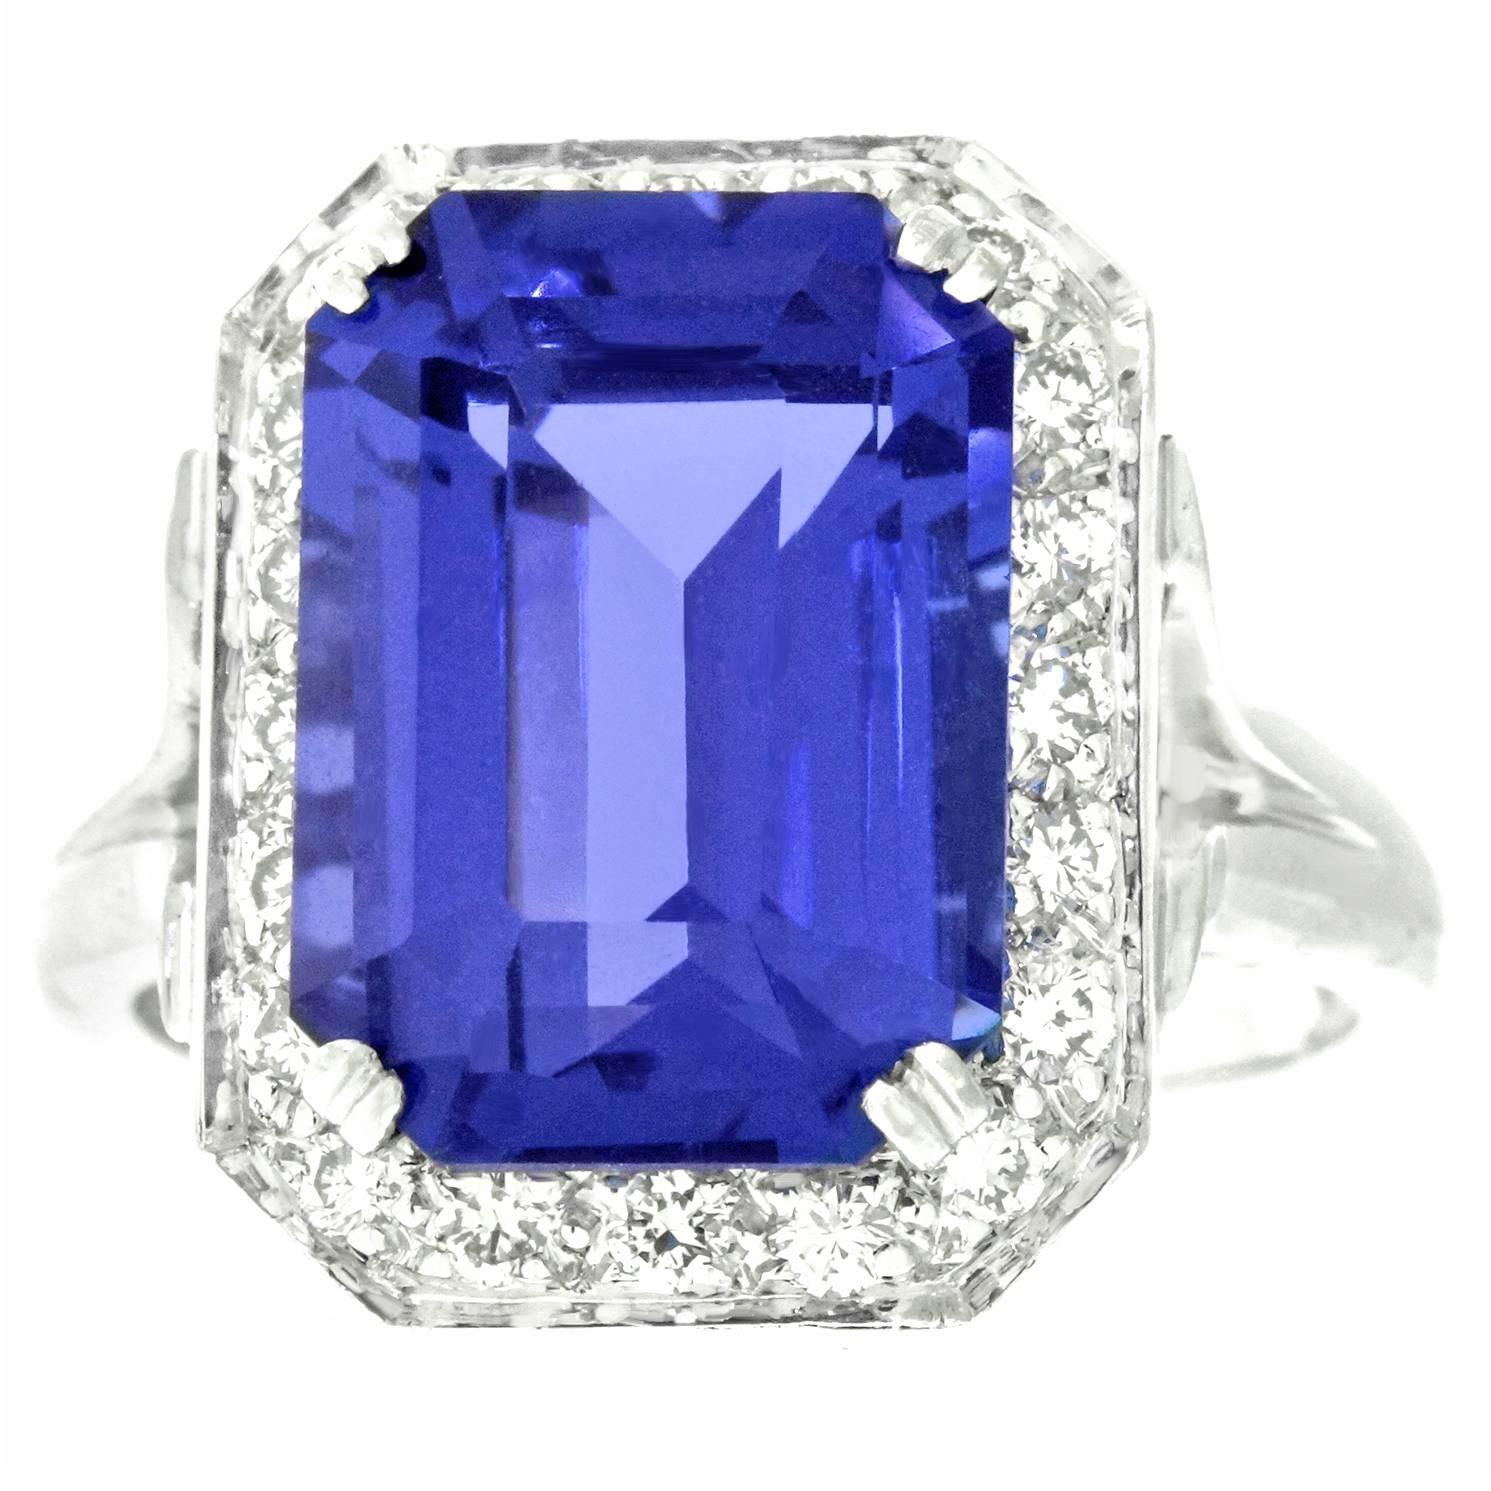 Circa 1980s, 18k, American. This ring is all about the lush 7.0 carat tanzanite. Its brilliant deep lavender blue color and fine clarity are sublime. Additionally set with .48 carats of superb white accent diamonds, this ring features a thoughtful